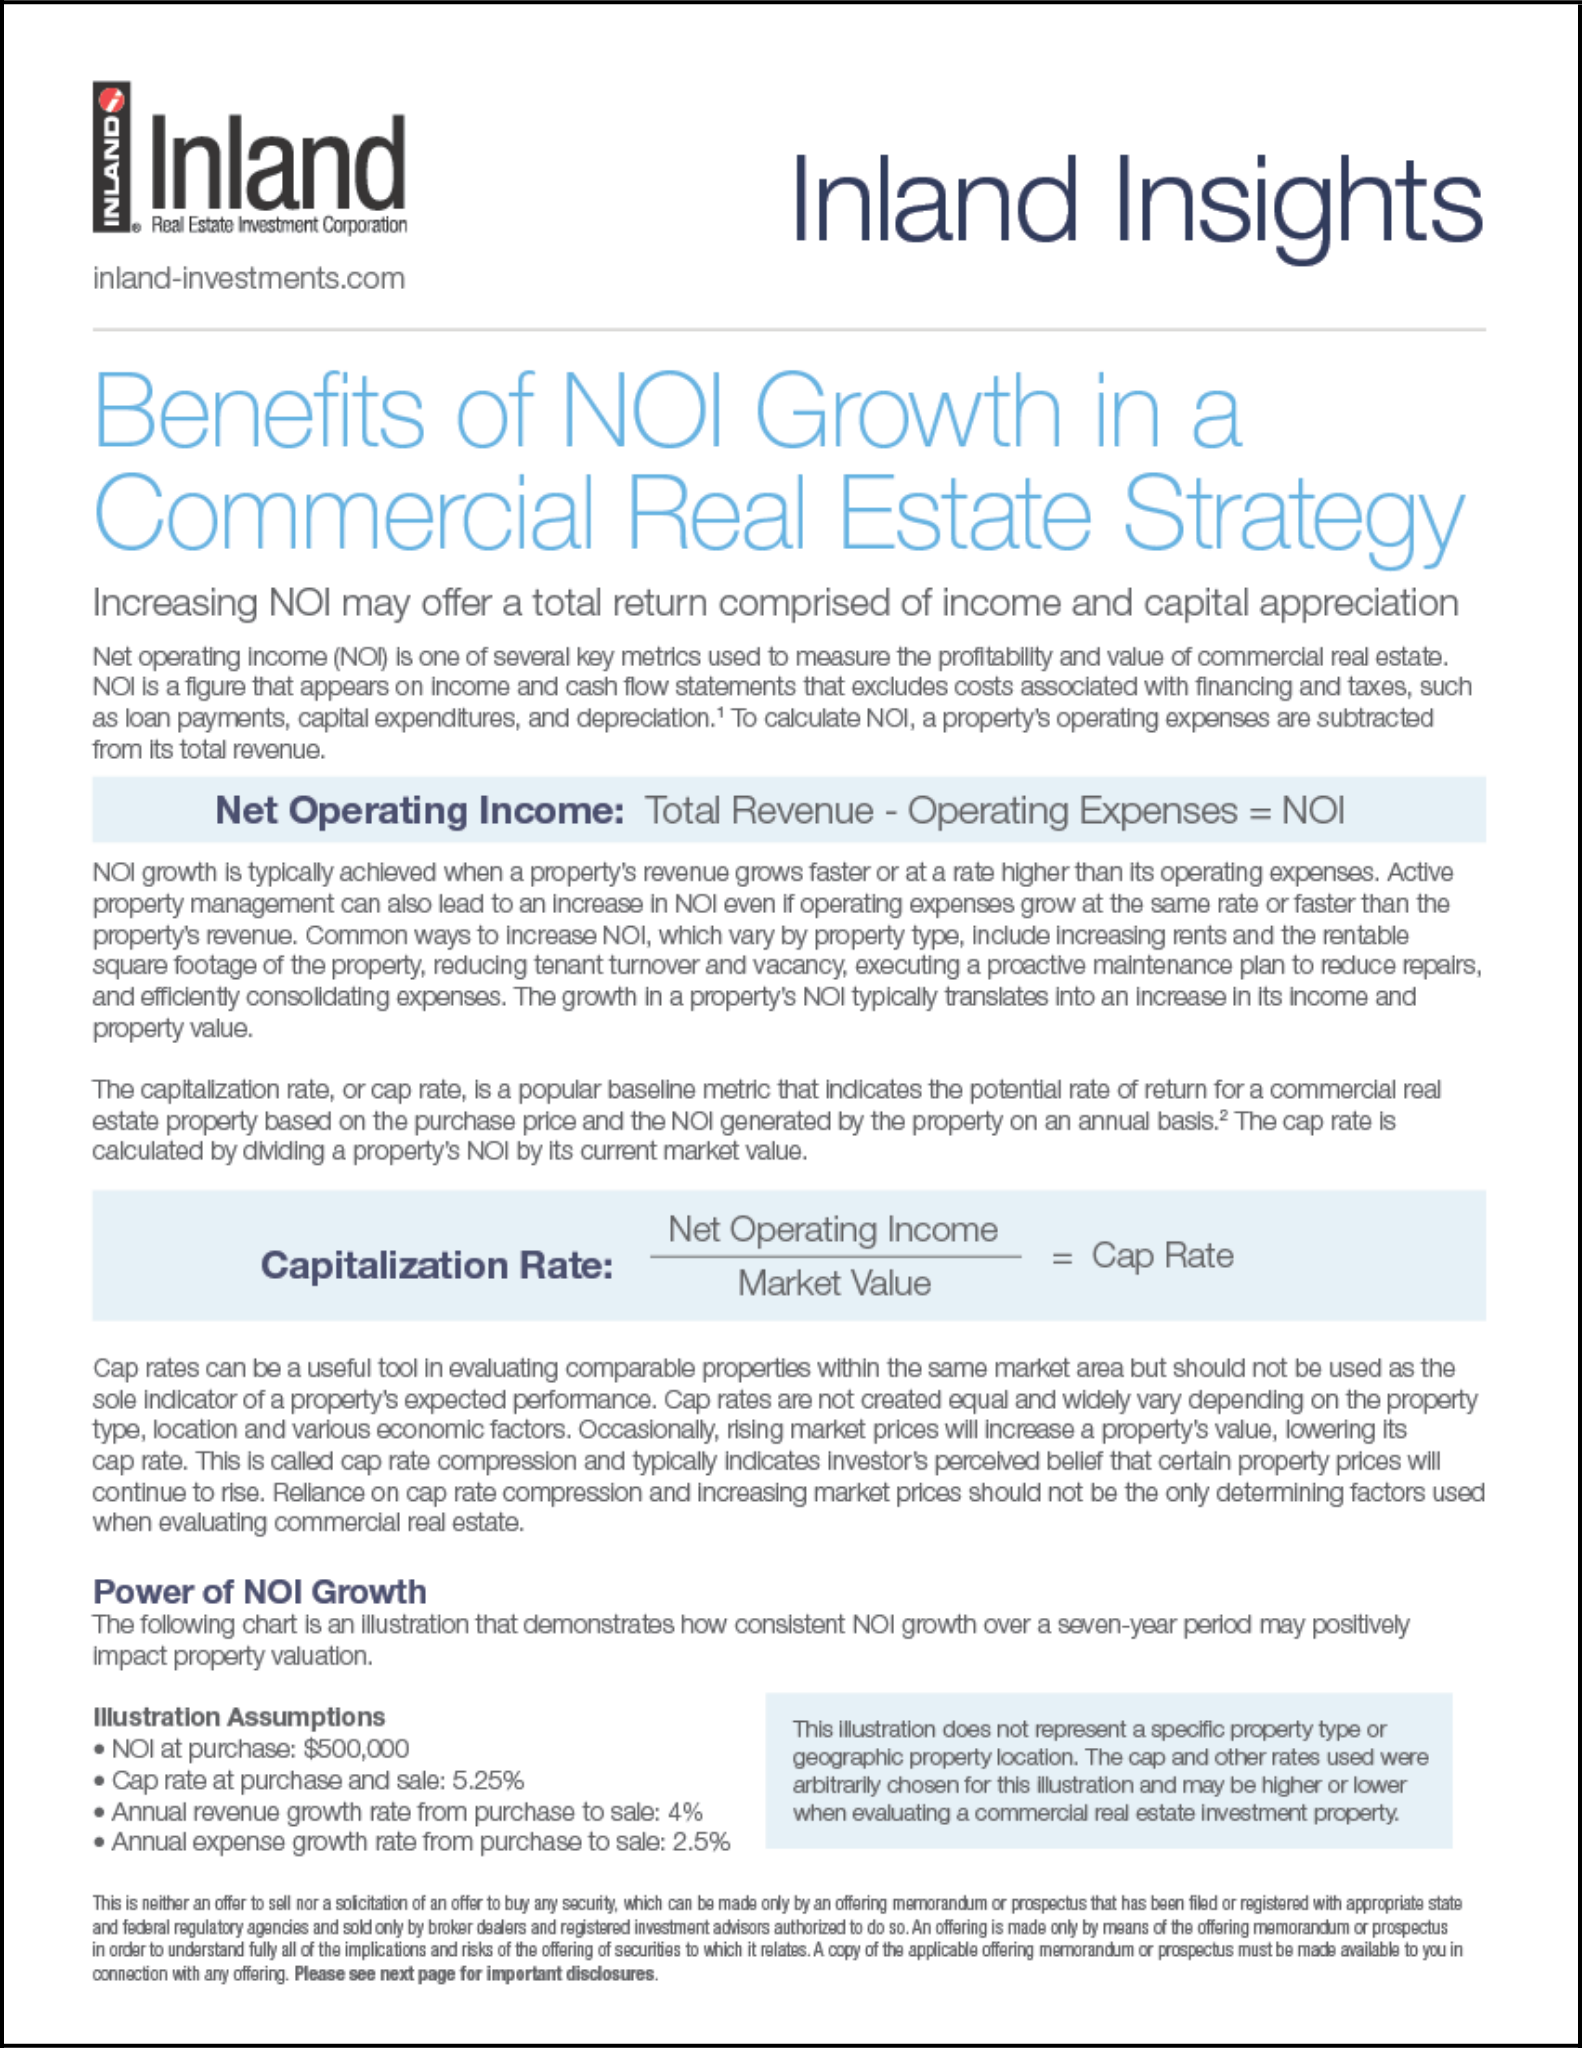 Benefits of NOI Growth in a Commercial Real Estate Strategy 